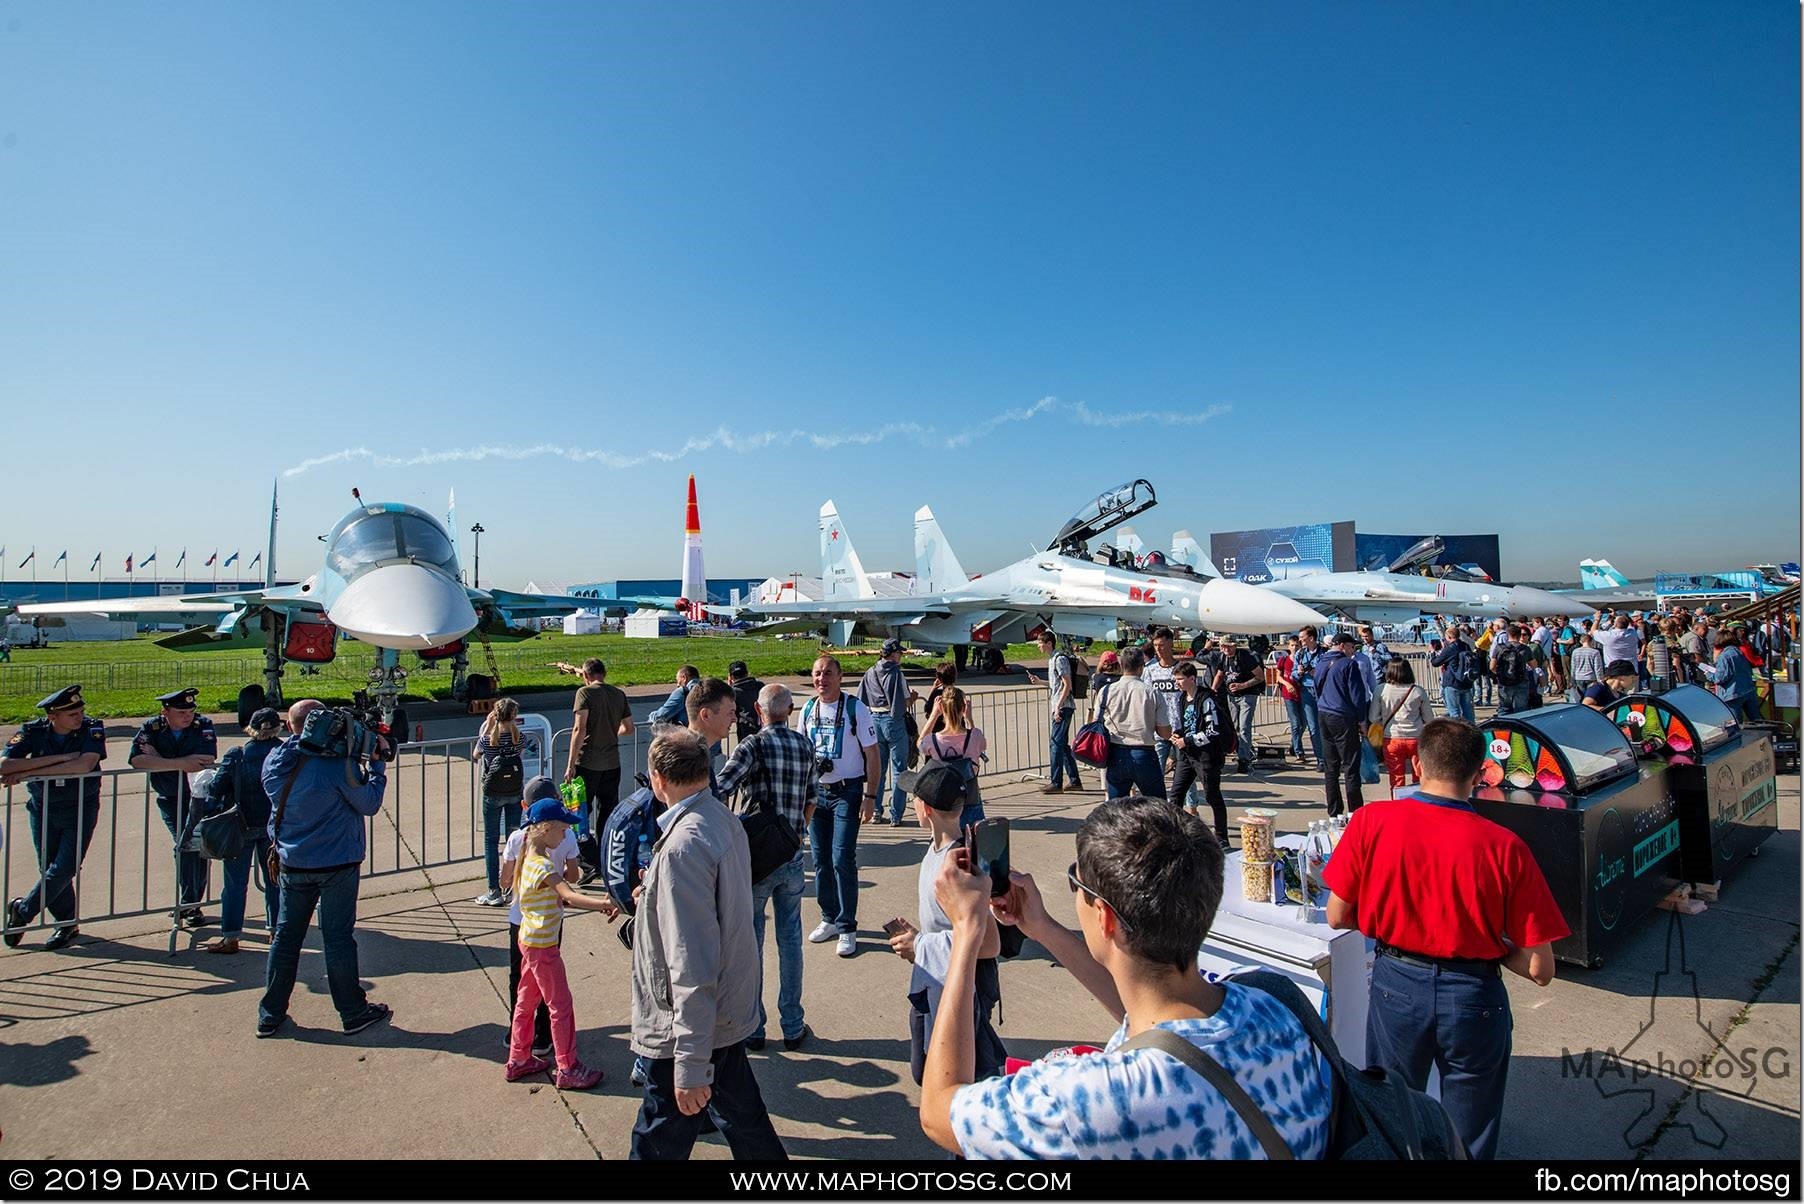 Crowds around the fighters static display